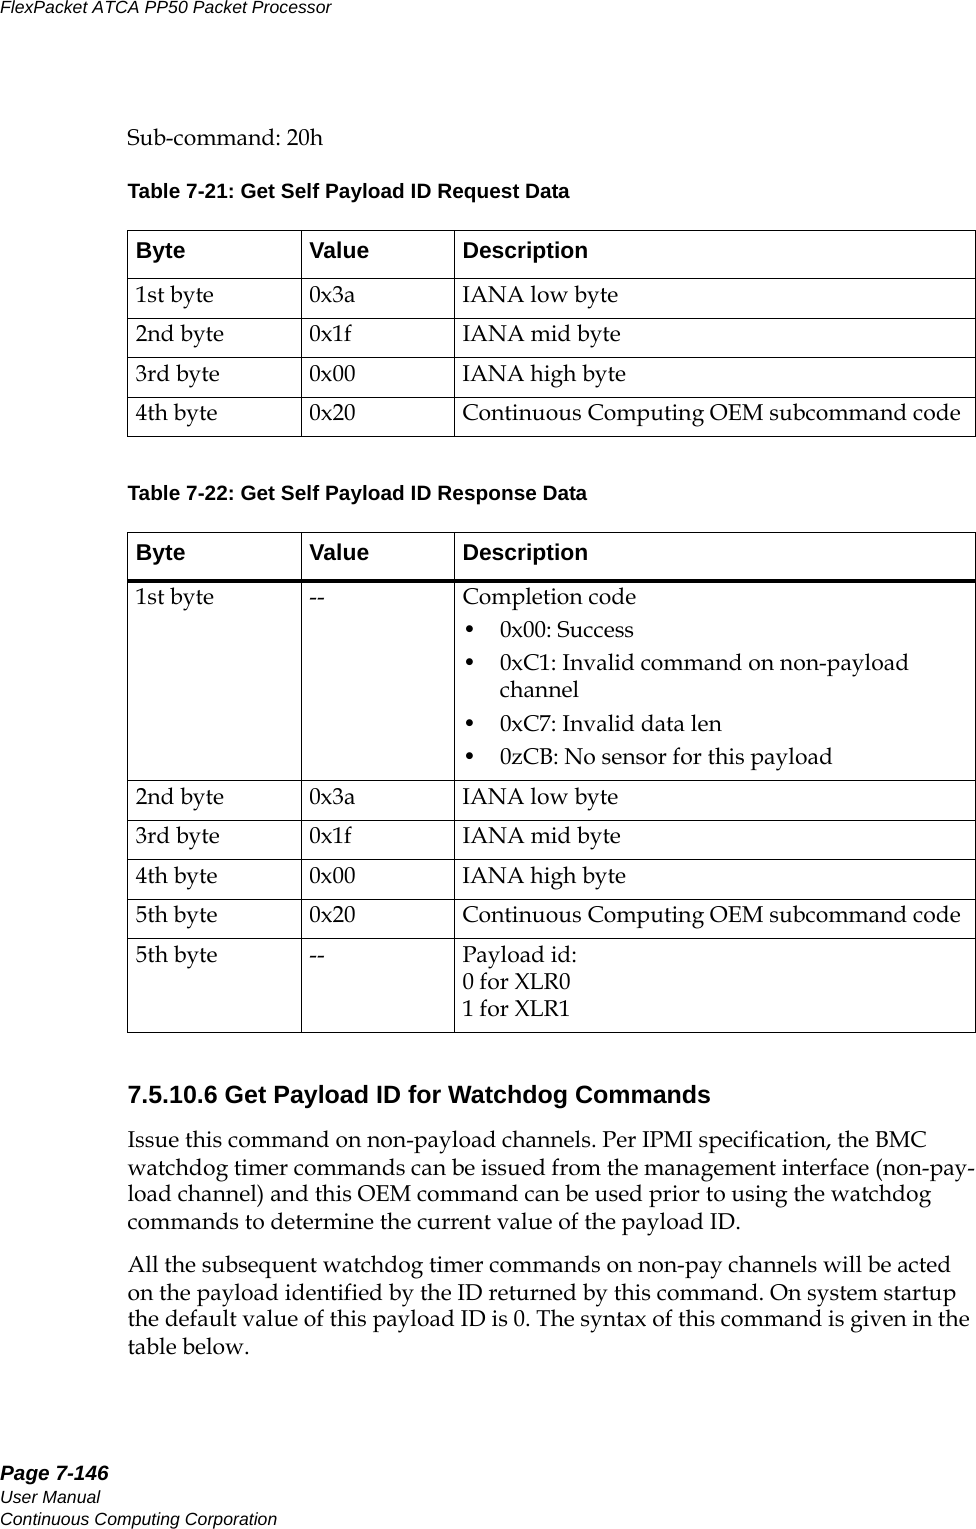 Page 7-146User ManualContinuous Computing CorporationFlexPacket ATCA PP50 Packet Processor     PreliminarySub-command: 20h7.5.10.6 Get Payload ID for Watchdog CommandsIssue this command on non-payload channels. Per IPMI specification, the BMC watchdog timer commands can be issued from the management interface (non-pay-load channel) and this OEM command can be used prior to using the watchdog commands to determine the current value of the payload ID. All the subsequent watchdog timer commands on non-pay channels will be acted on the payload identified by the ID returned by this command. On system startup the default value of this payload ID is 0. The syntax of this command is given in the table below.Table 7-21: Get Self Payload ID Request DataByte Value Description1st byte 0x3a IANA low byte2nd byte 0x1f IANA mid byte3rd byte 0x00 IANA high byte4th byte 0x20 Continuous Computing OEM subcommand codeTable 7-22: Get Self Payload ID Response DataByte Value Description1st byte -- Completion code•0x00: Success• 0xC1: Invalid command on non-payload channel• 0xC7: Invalid data len• 0zCB: No sensor for this payload2nd byte 0x3a IANA low byte3rd byte 0x1f IANA mid byte4th byte 0x00 IANA high byte5th byte 0x20 Continuous Computing OEM subcommand code5th byte -- Payload id:0 for XLR01 for XLR1